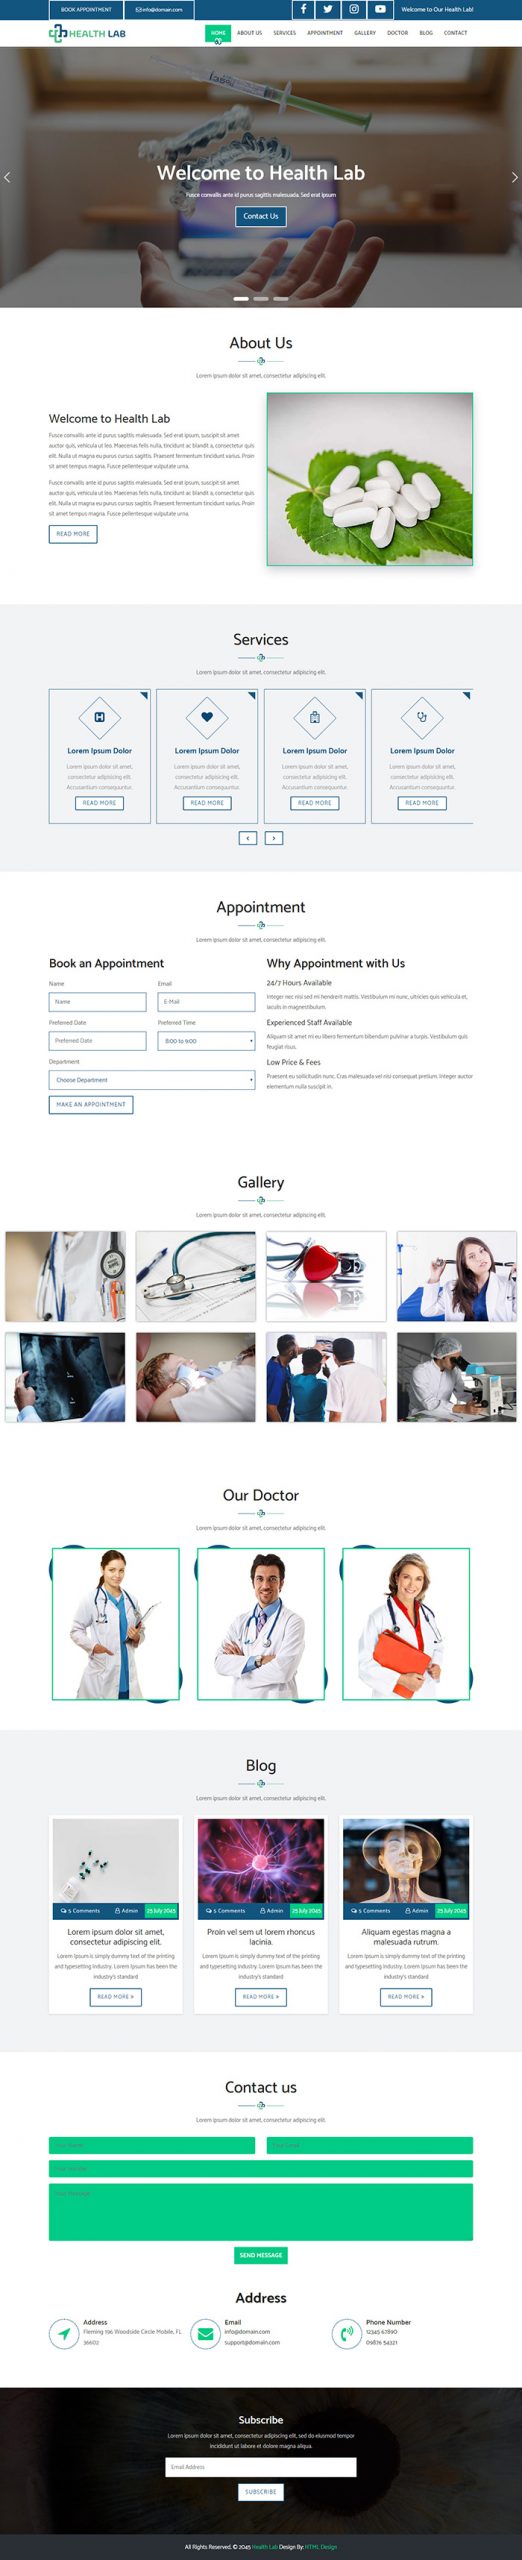 free-health-lab-website-template-free-website-templates-html5-css